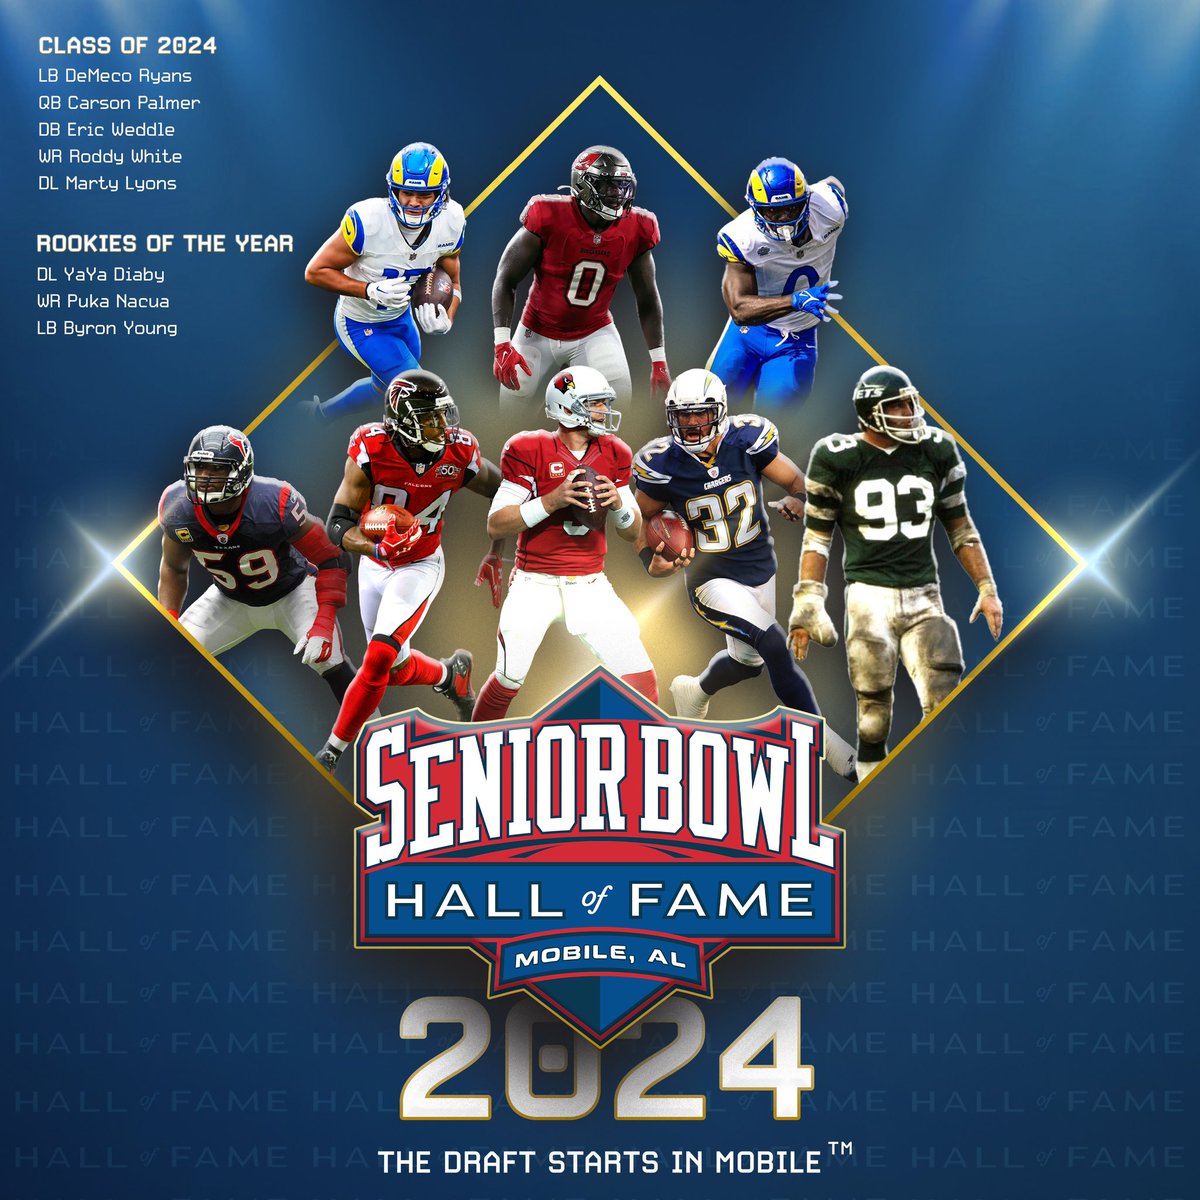 The Senior Bowl Hall of Fame Class of 2024! LB DeMeco Ryans #Texans QB Carson Palmer #Cardinals DB Eric Weddle #Chargers WR Roddy White #Falcons DL Marty Lyons #Jets DL YaYa Diaby #Buccaneers WR Puka Nacua #Rams LB Byron Young #Rams #TheDraftStartsInMOBILE™️ #SBHOF2024…